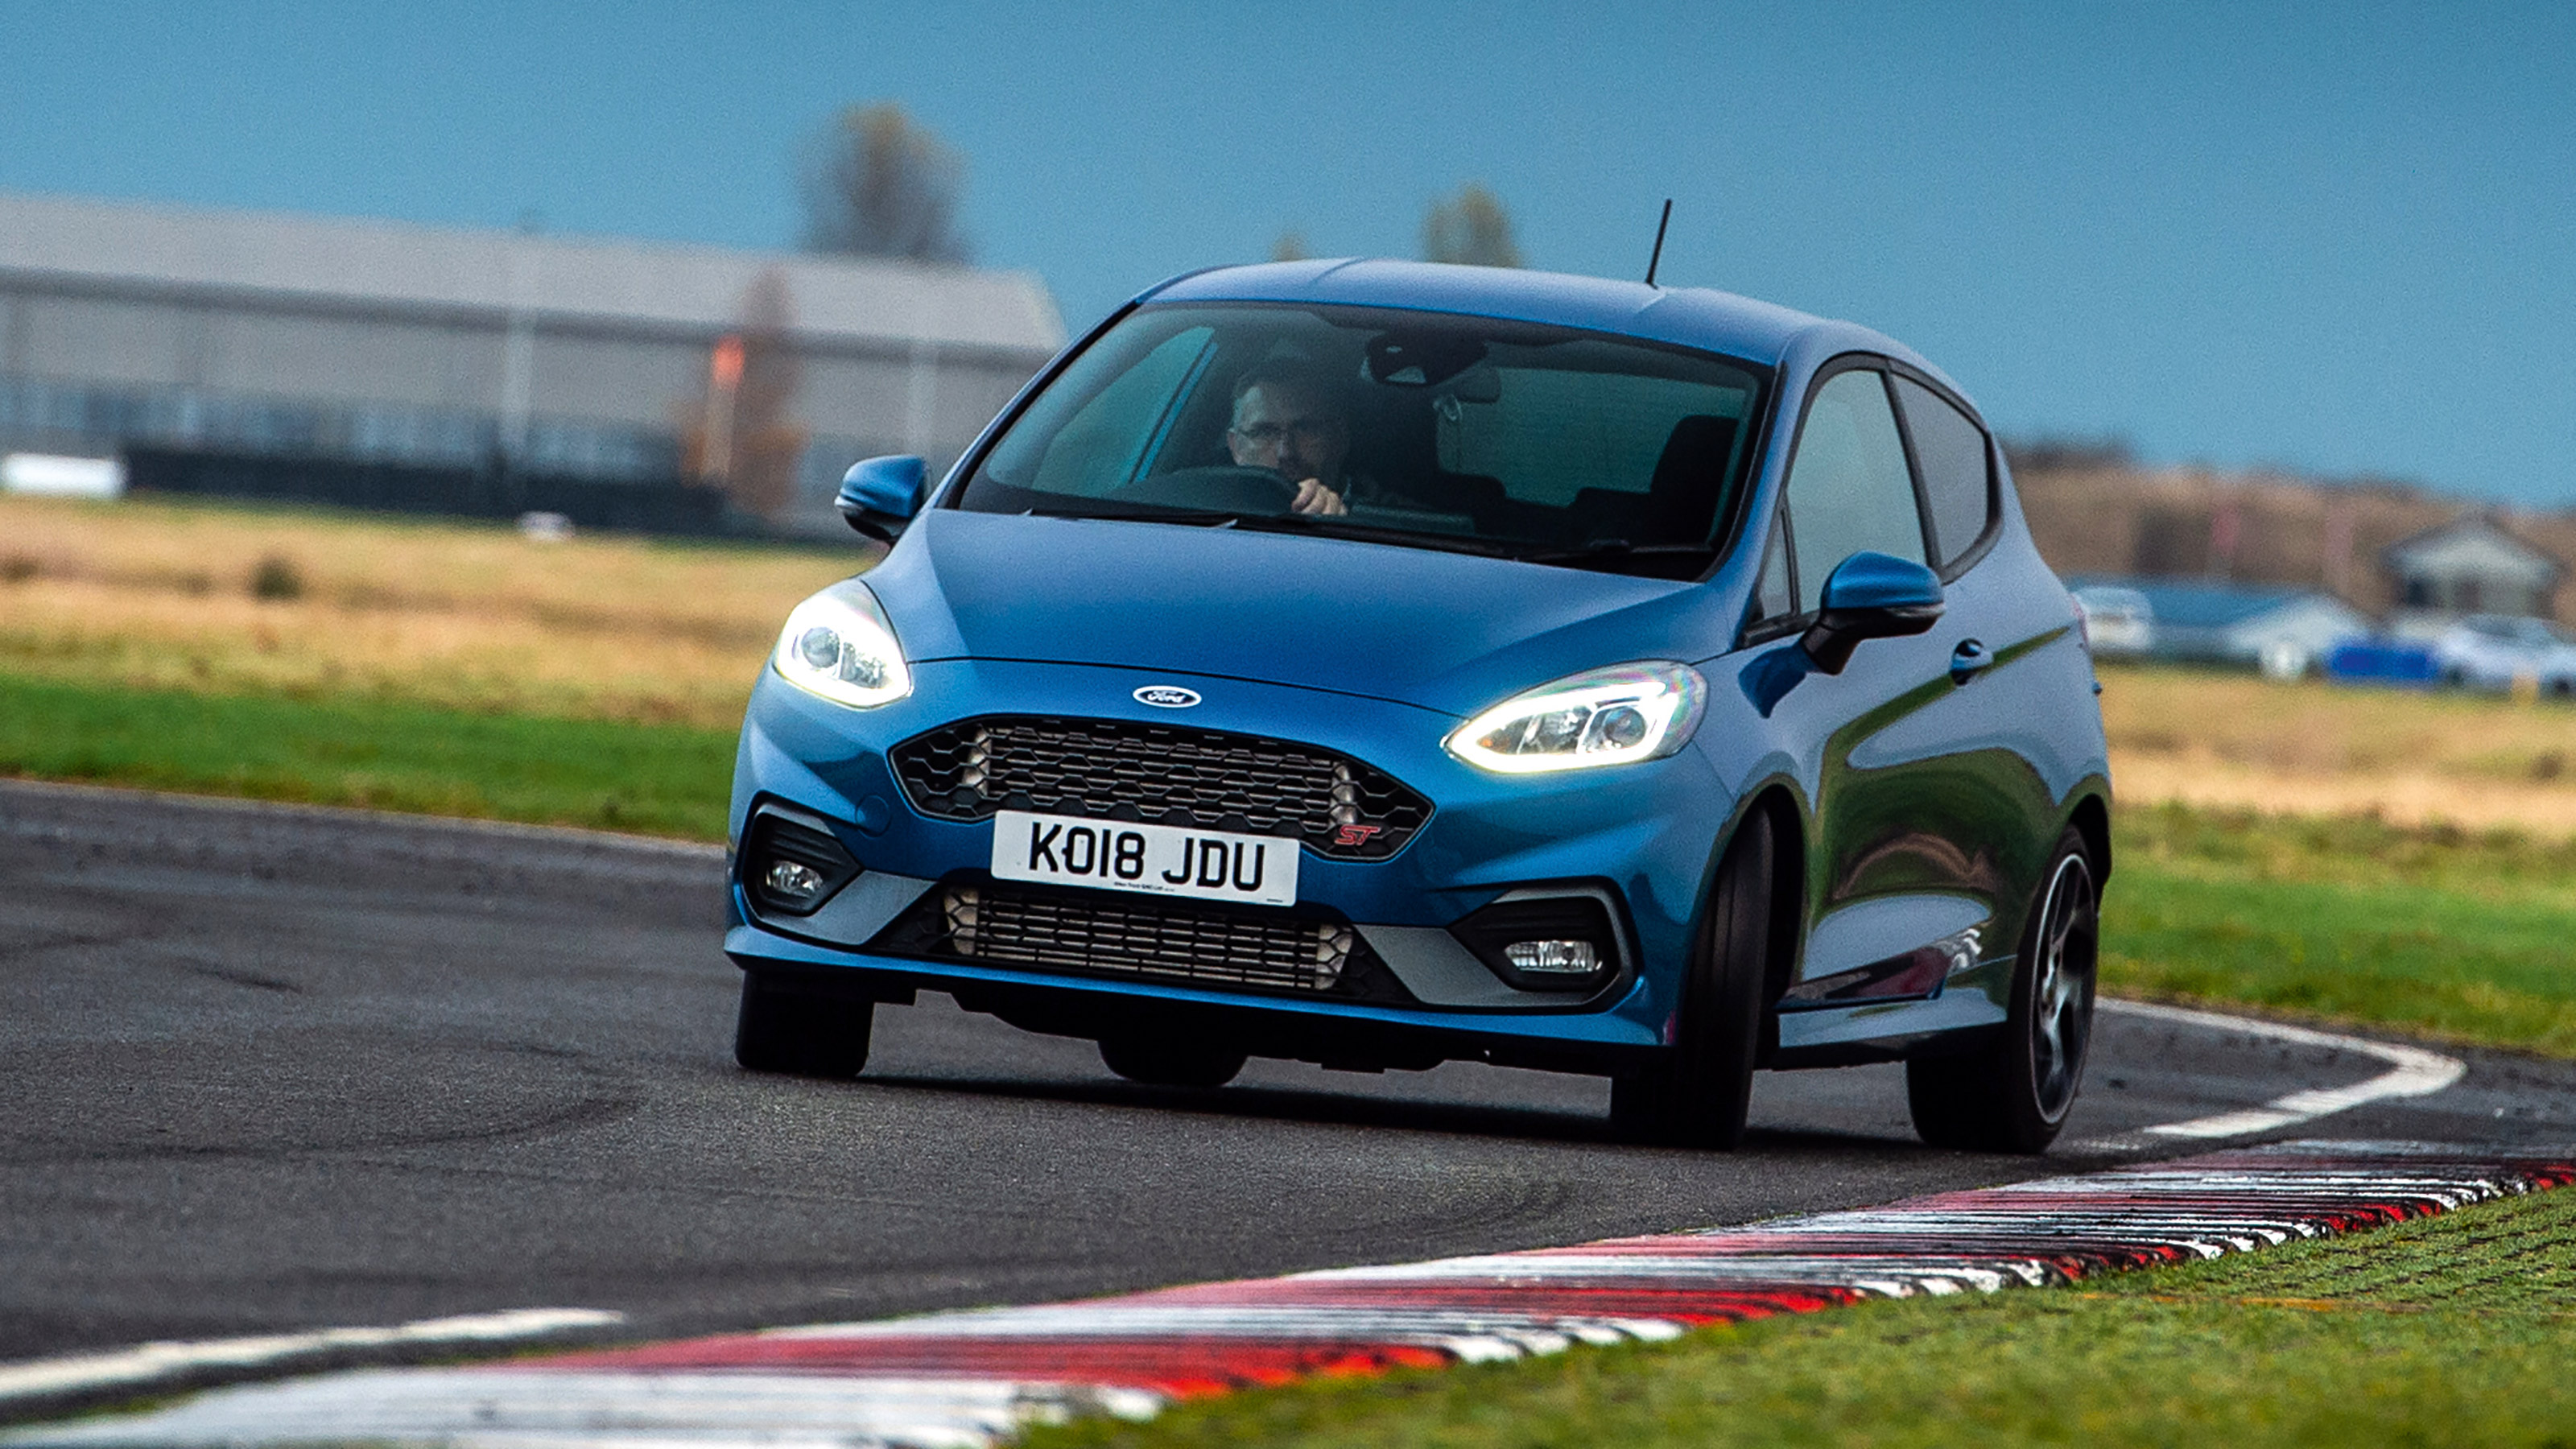 Used Ford Fiesta ST (2012 - 2017) Review